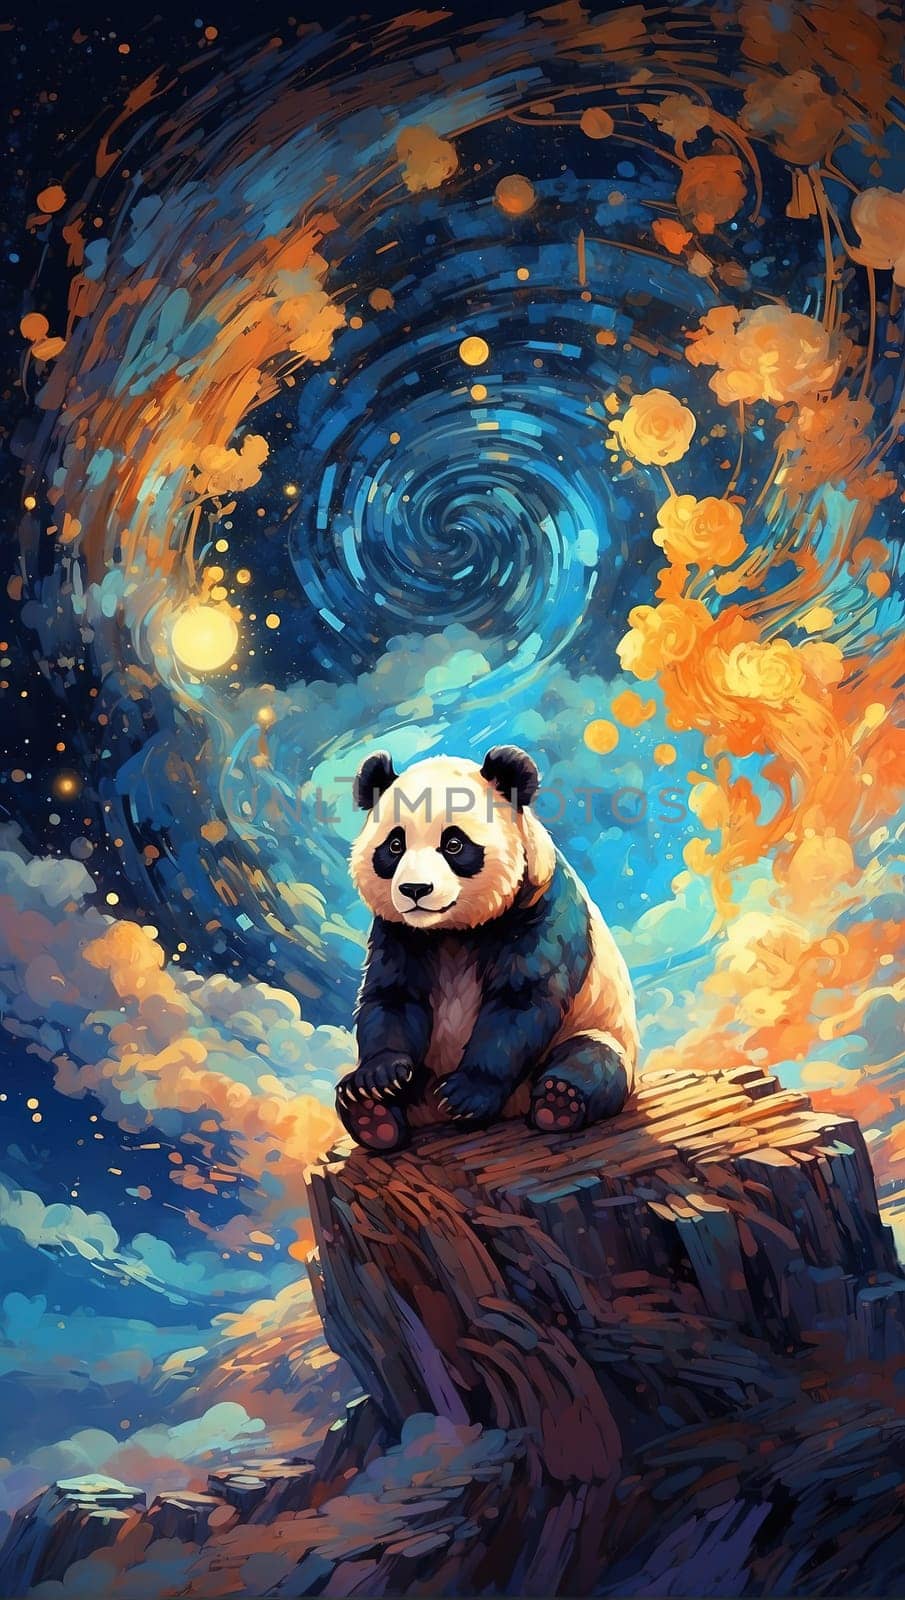 Panda sitting on a rock in the moonlight. Illustration by Waseem-Creations